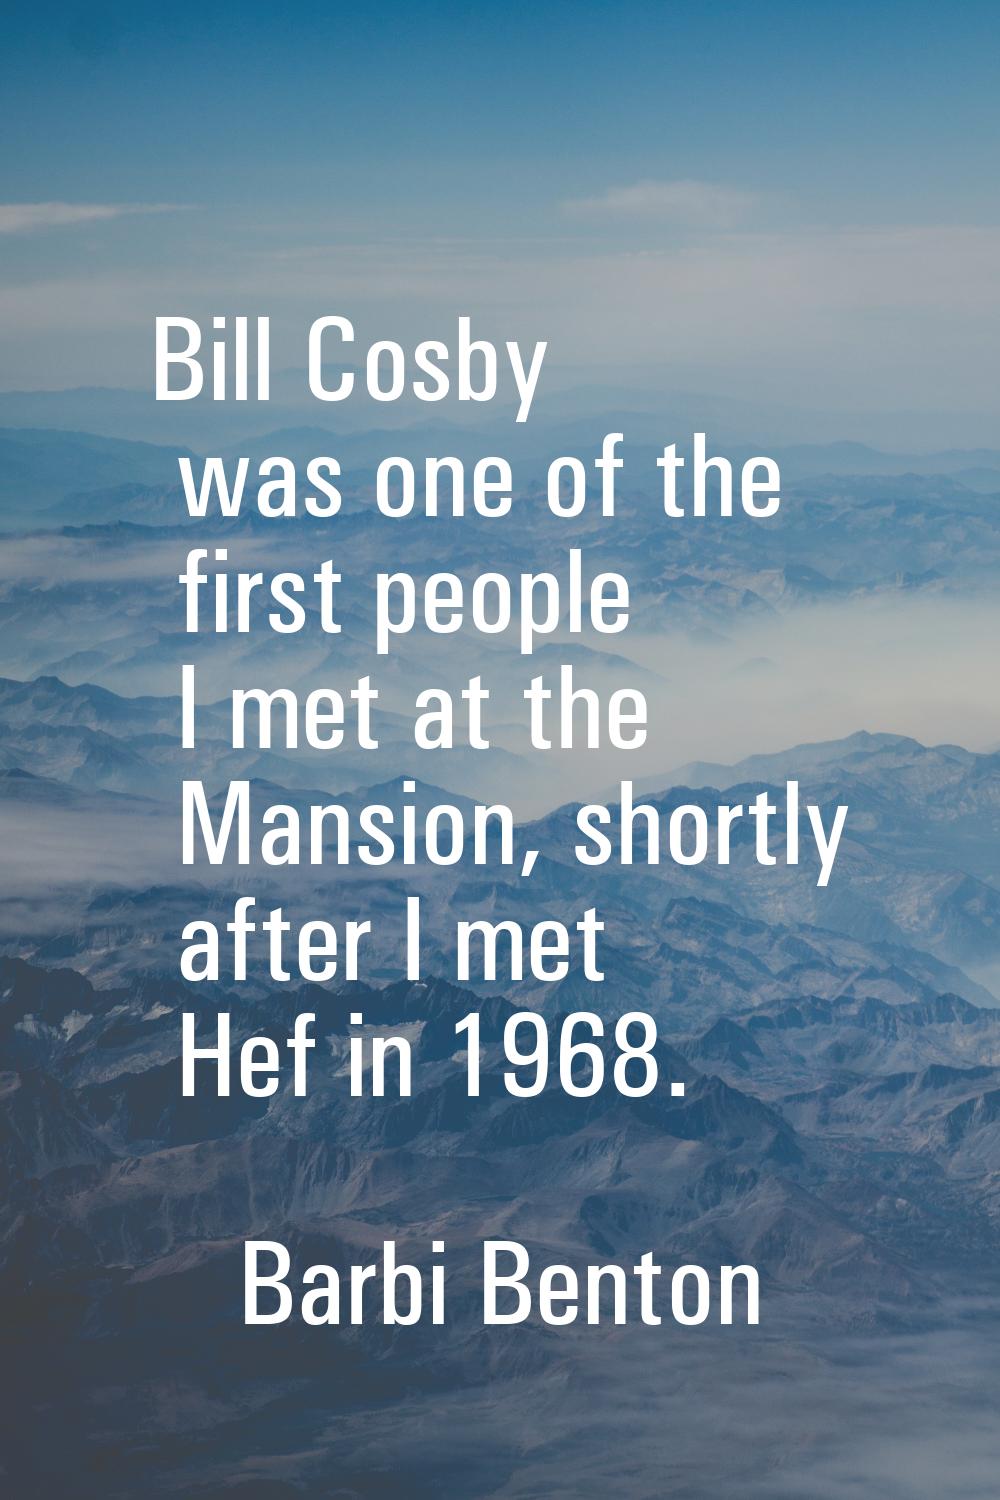 Bill Cosby was one of the first people I met at the Mansion, shortly after I met Hef in 1968.